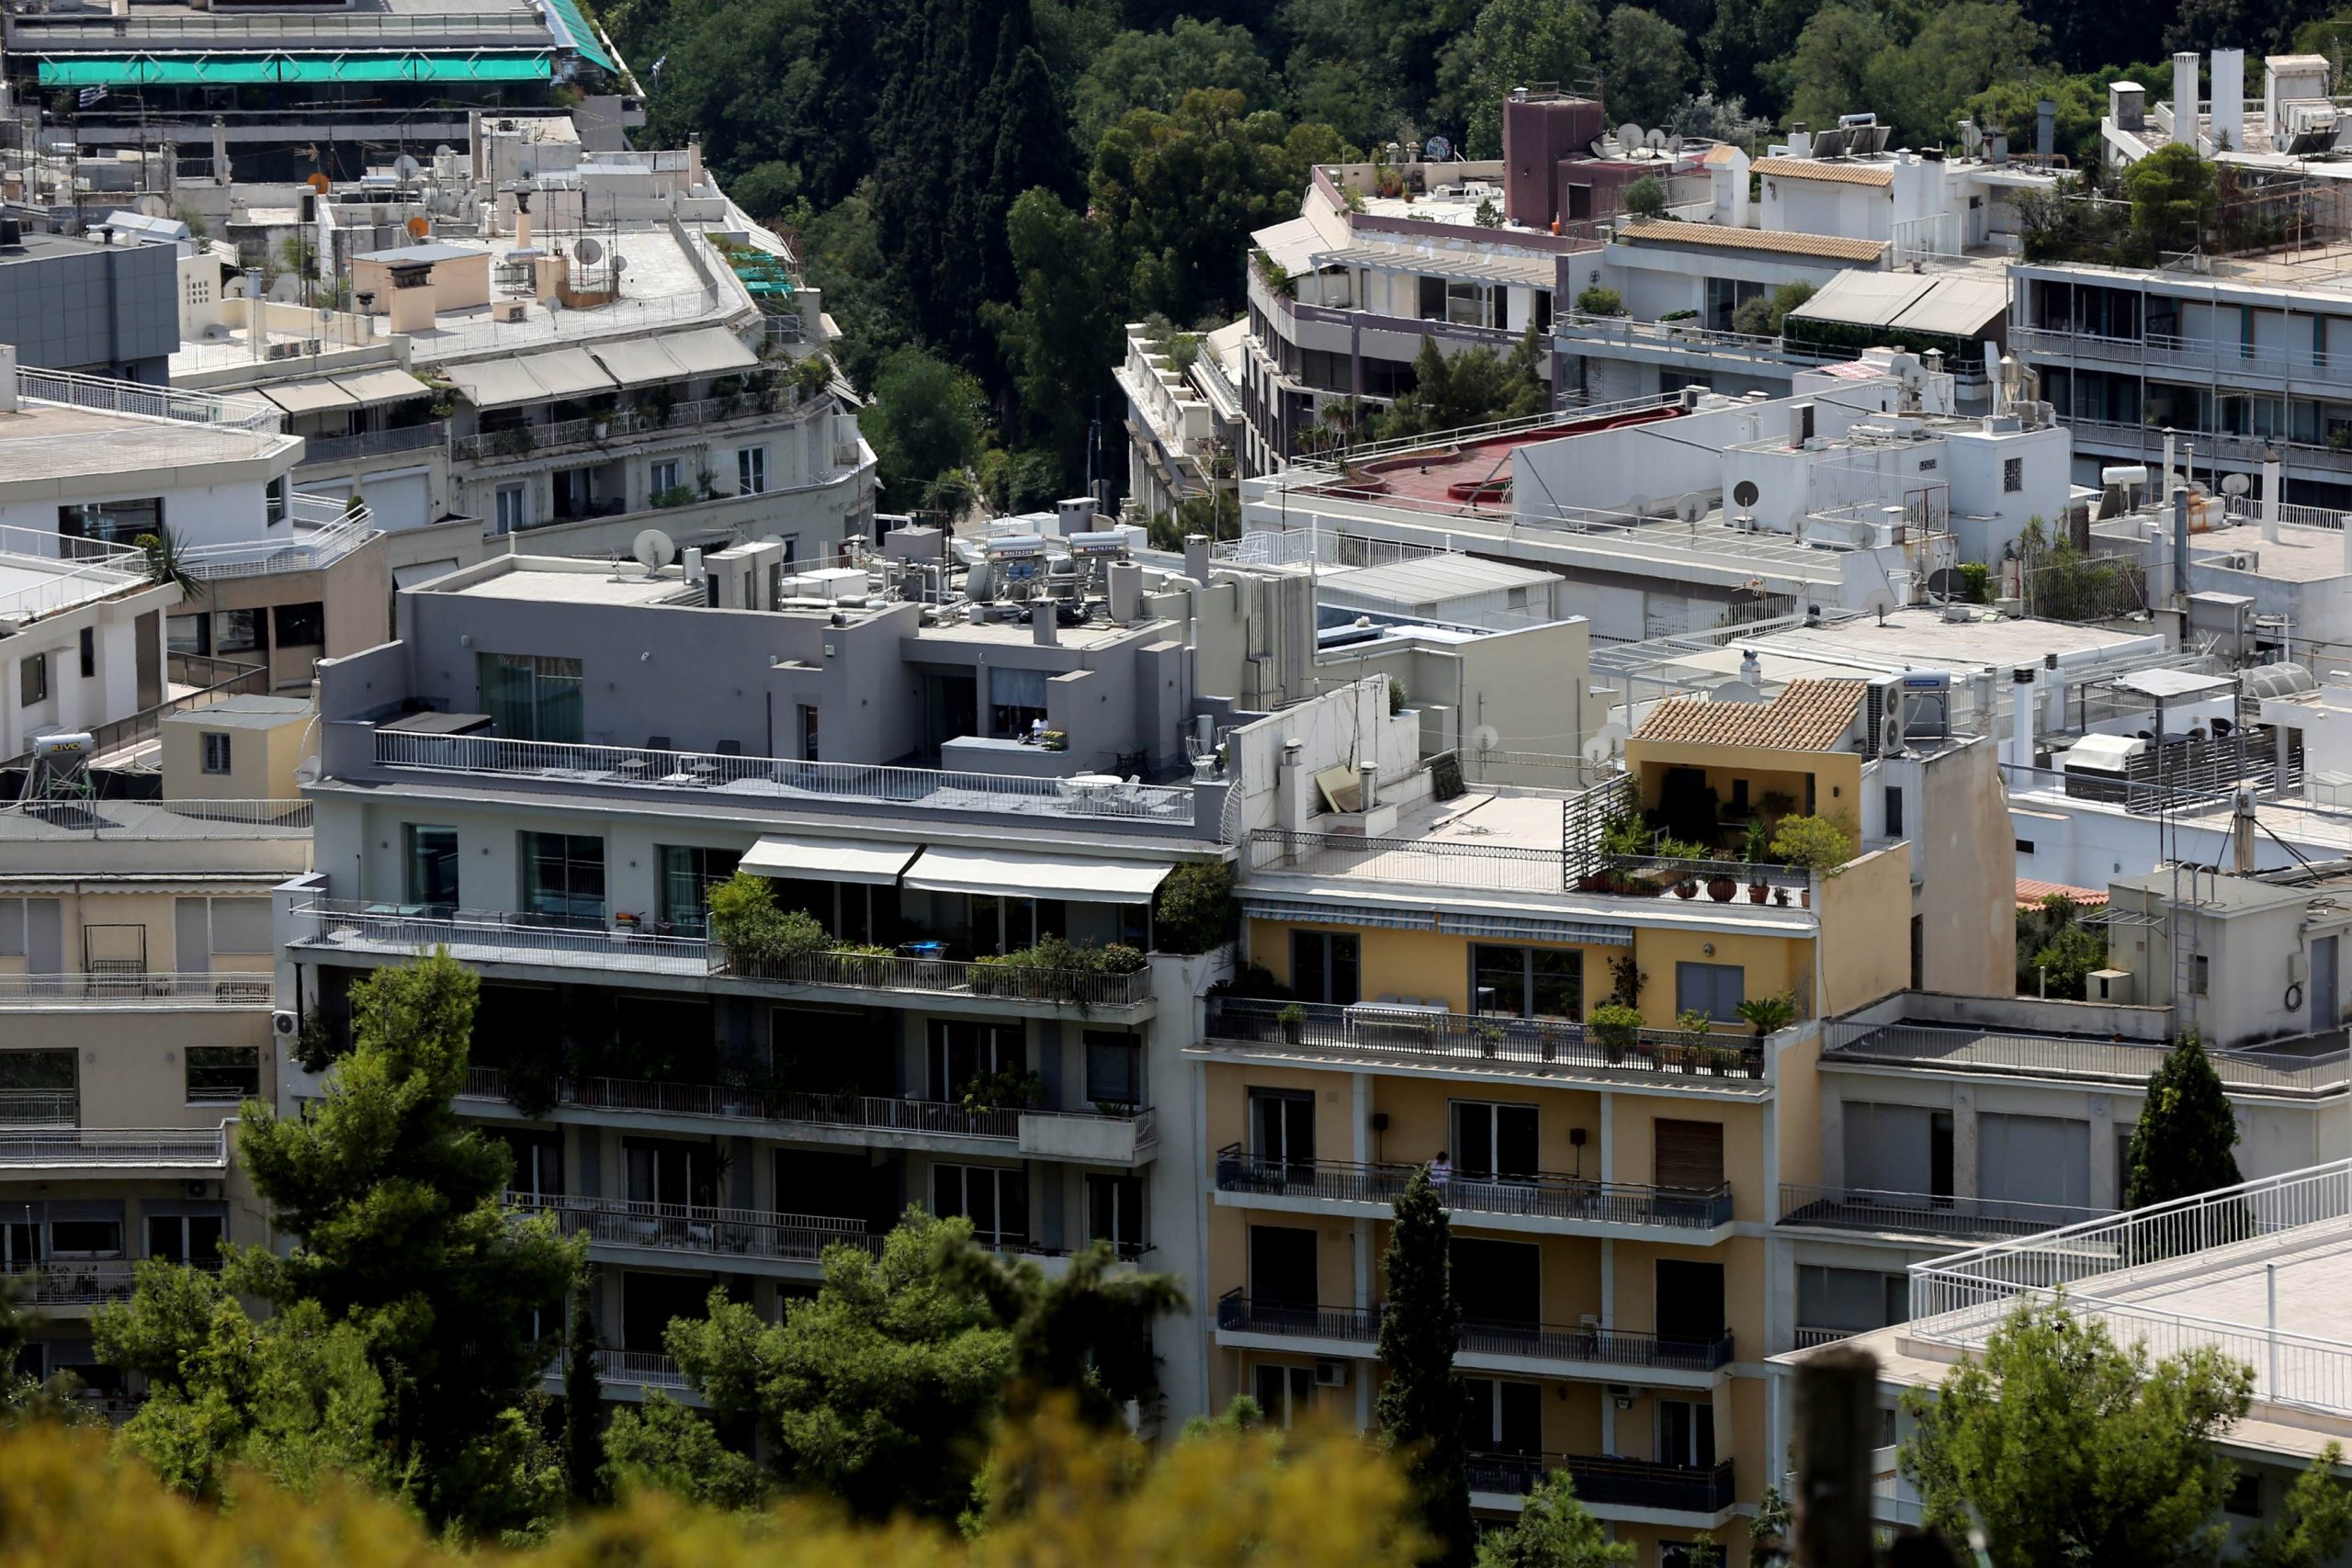 Subsidy Program Aims to Open Closed Apts. in Athens